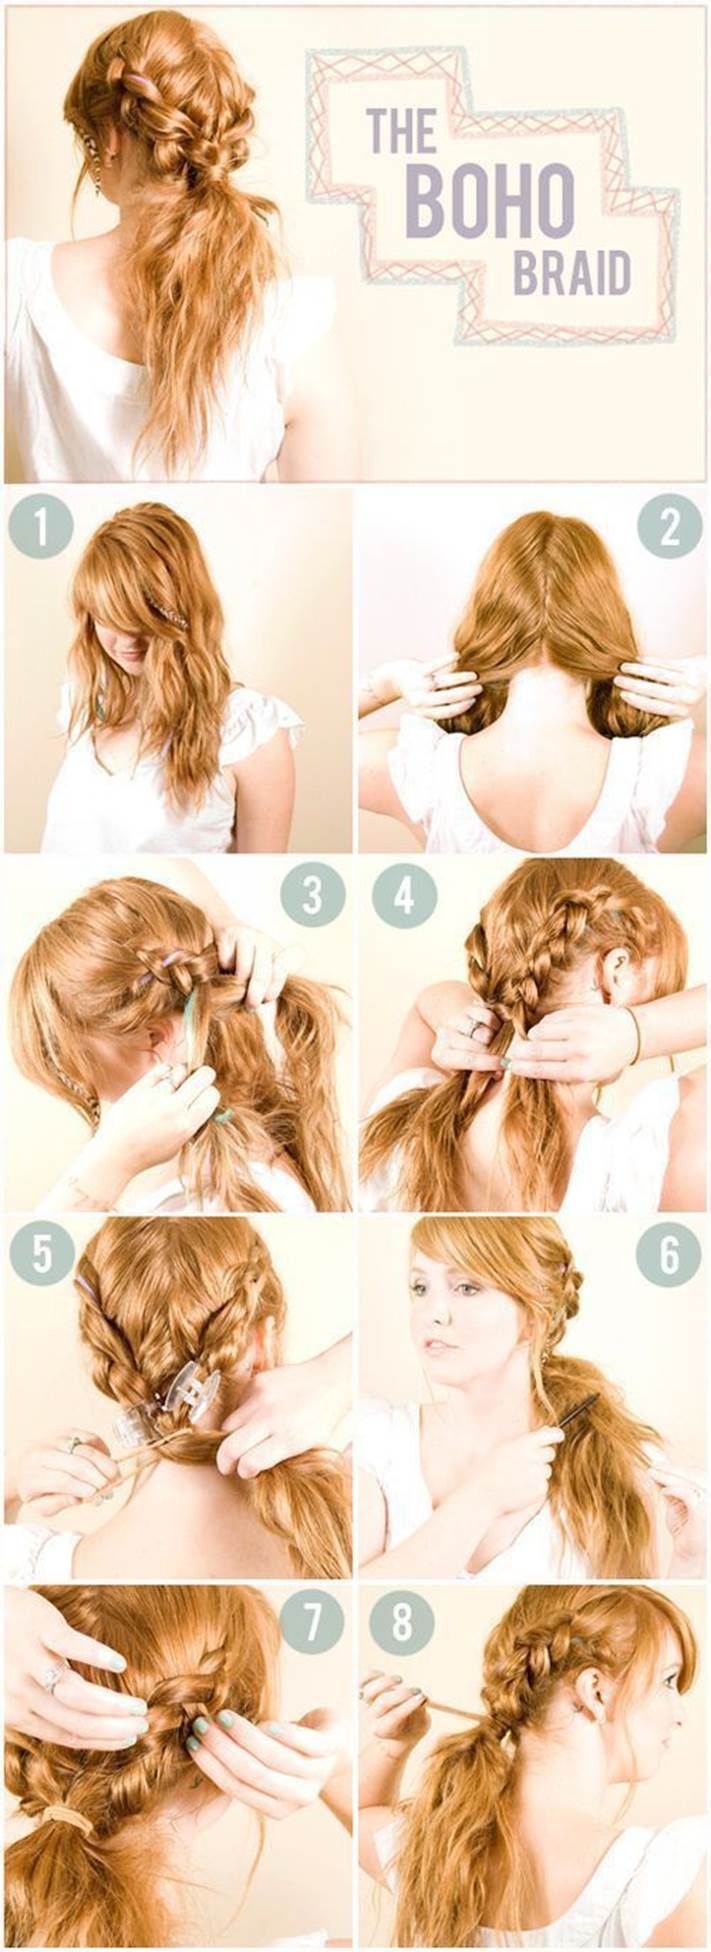 Cool DIY hairstyles for girls19 Cool DIY hairstyles for girls